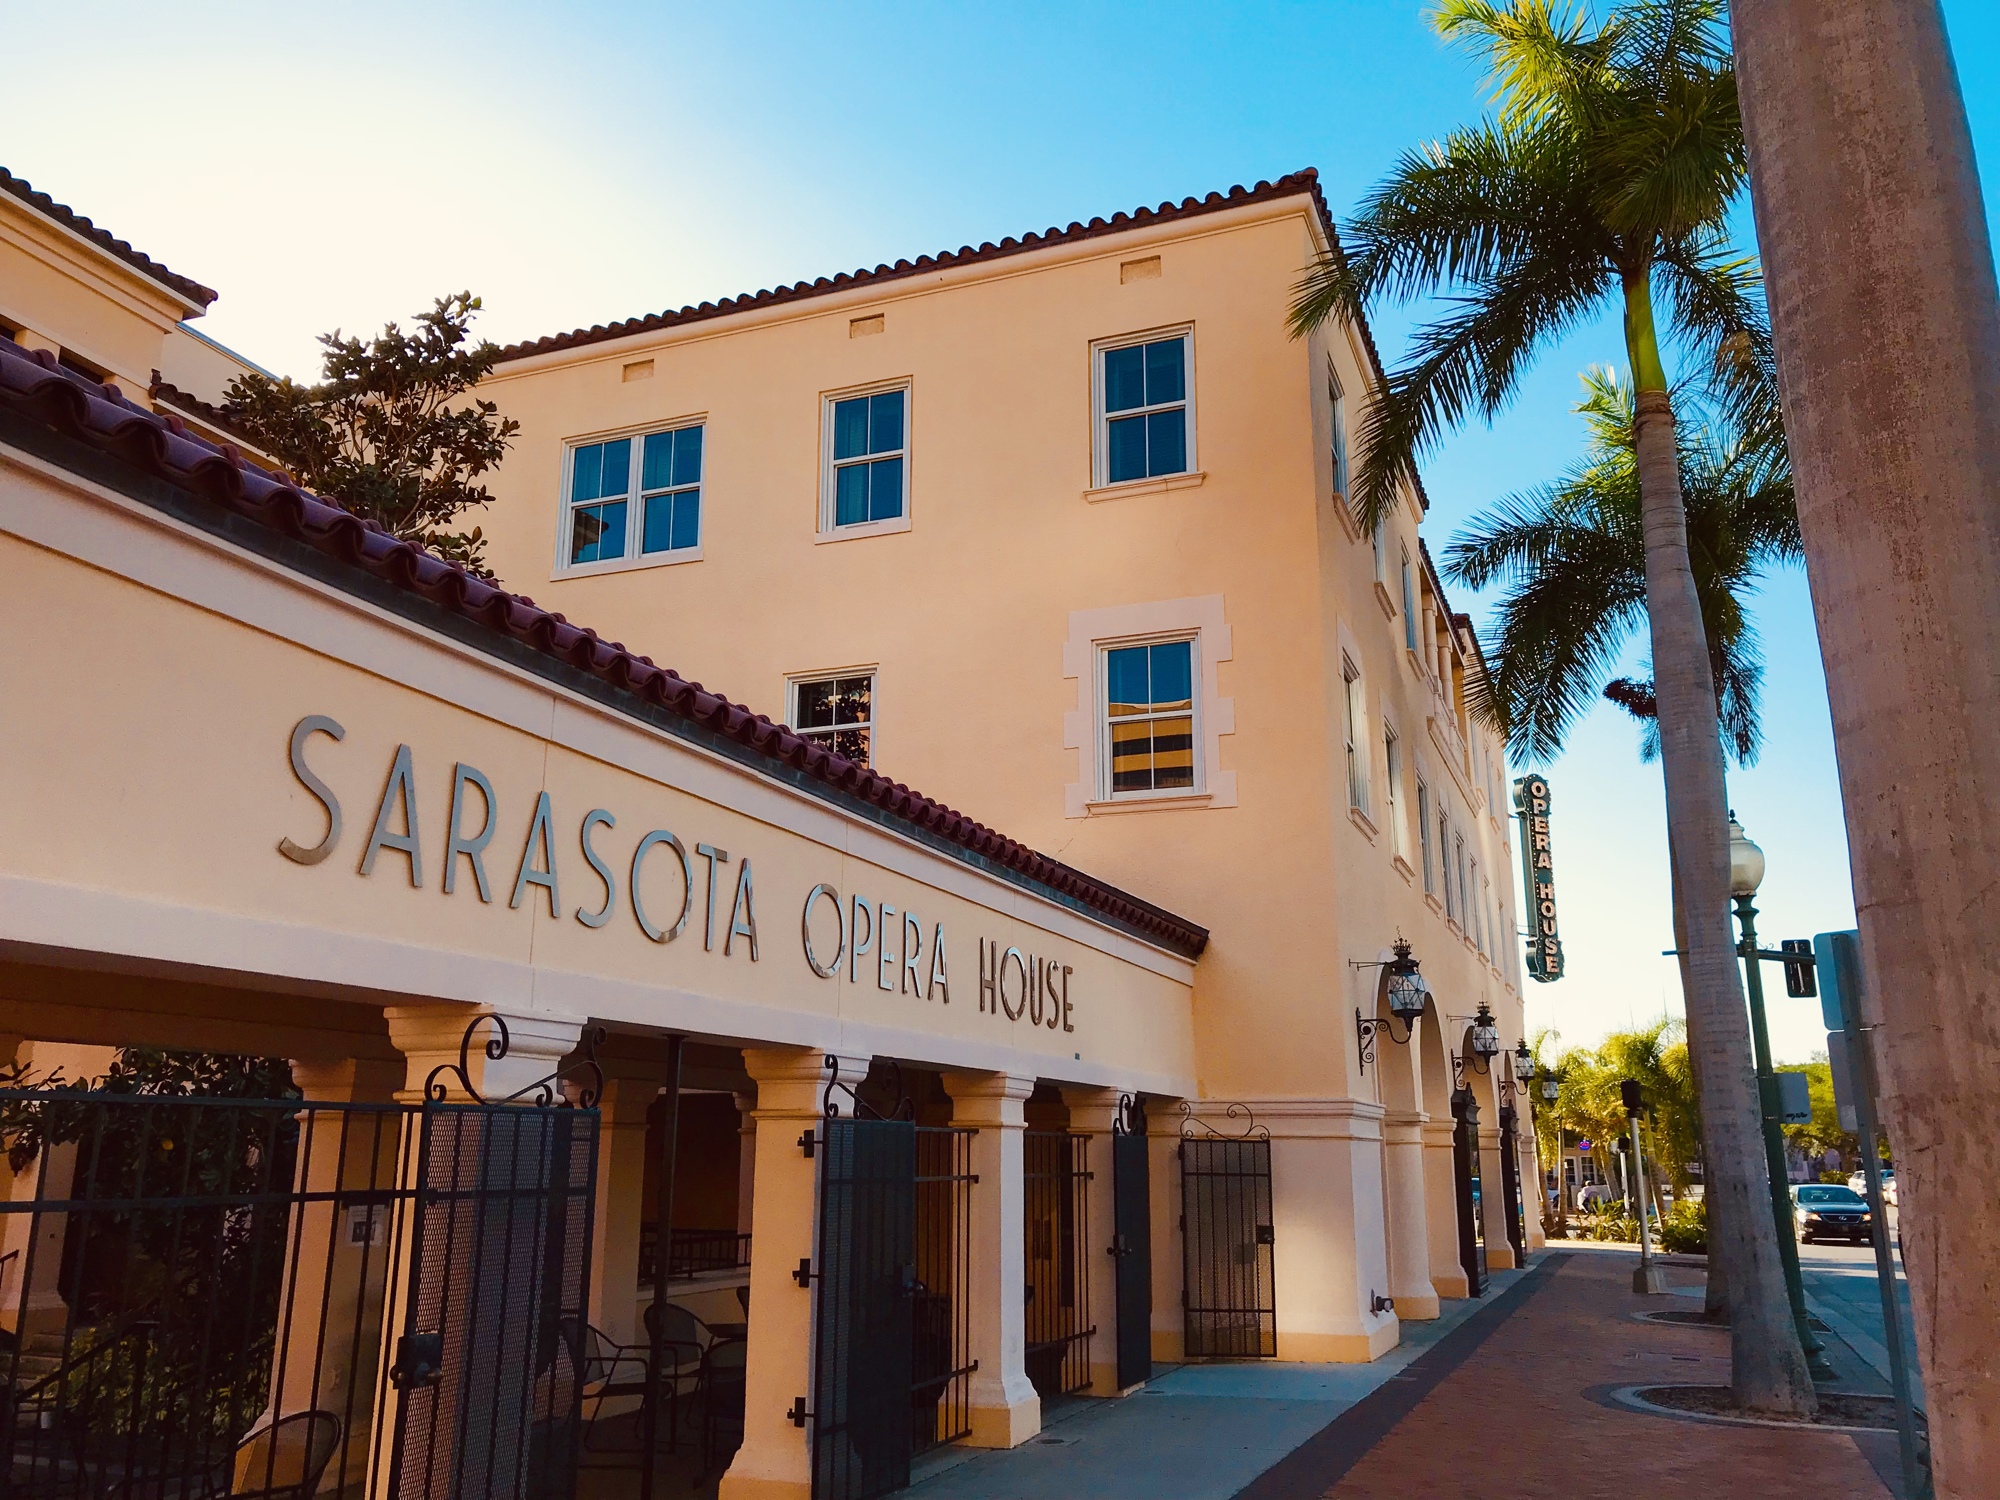 The Sarasota Opera had four Winter Festival productions running when it had to shut down.